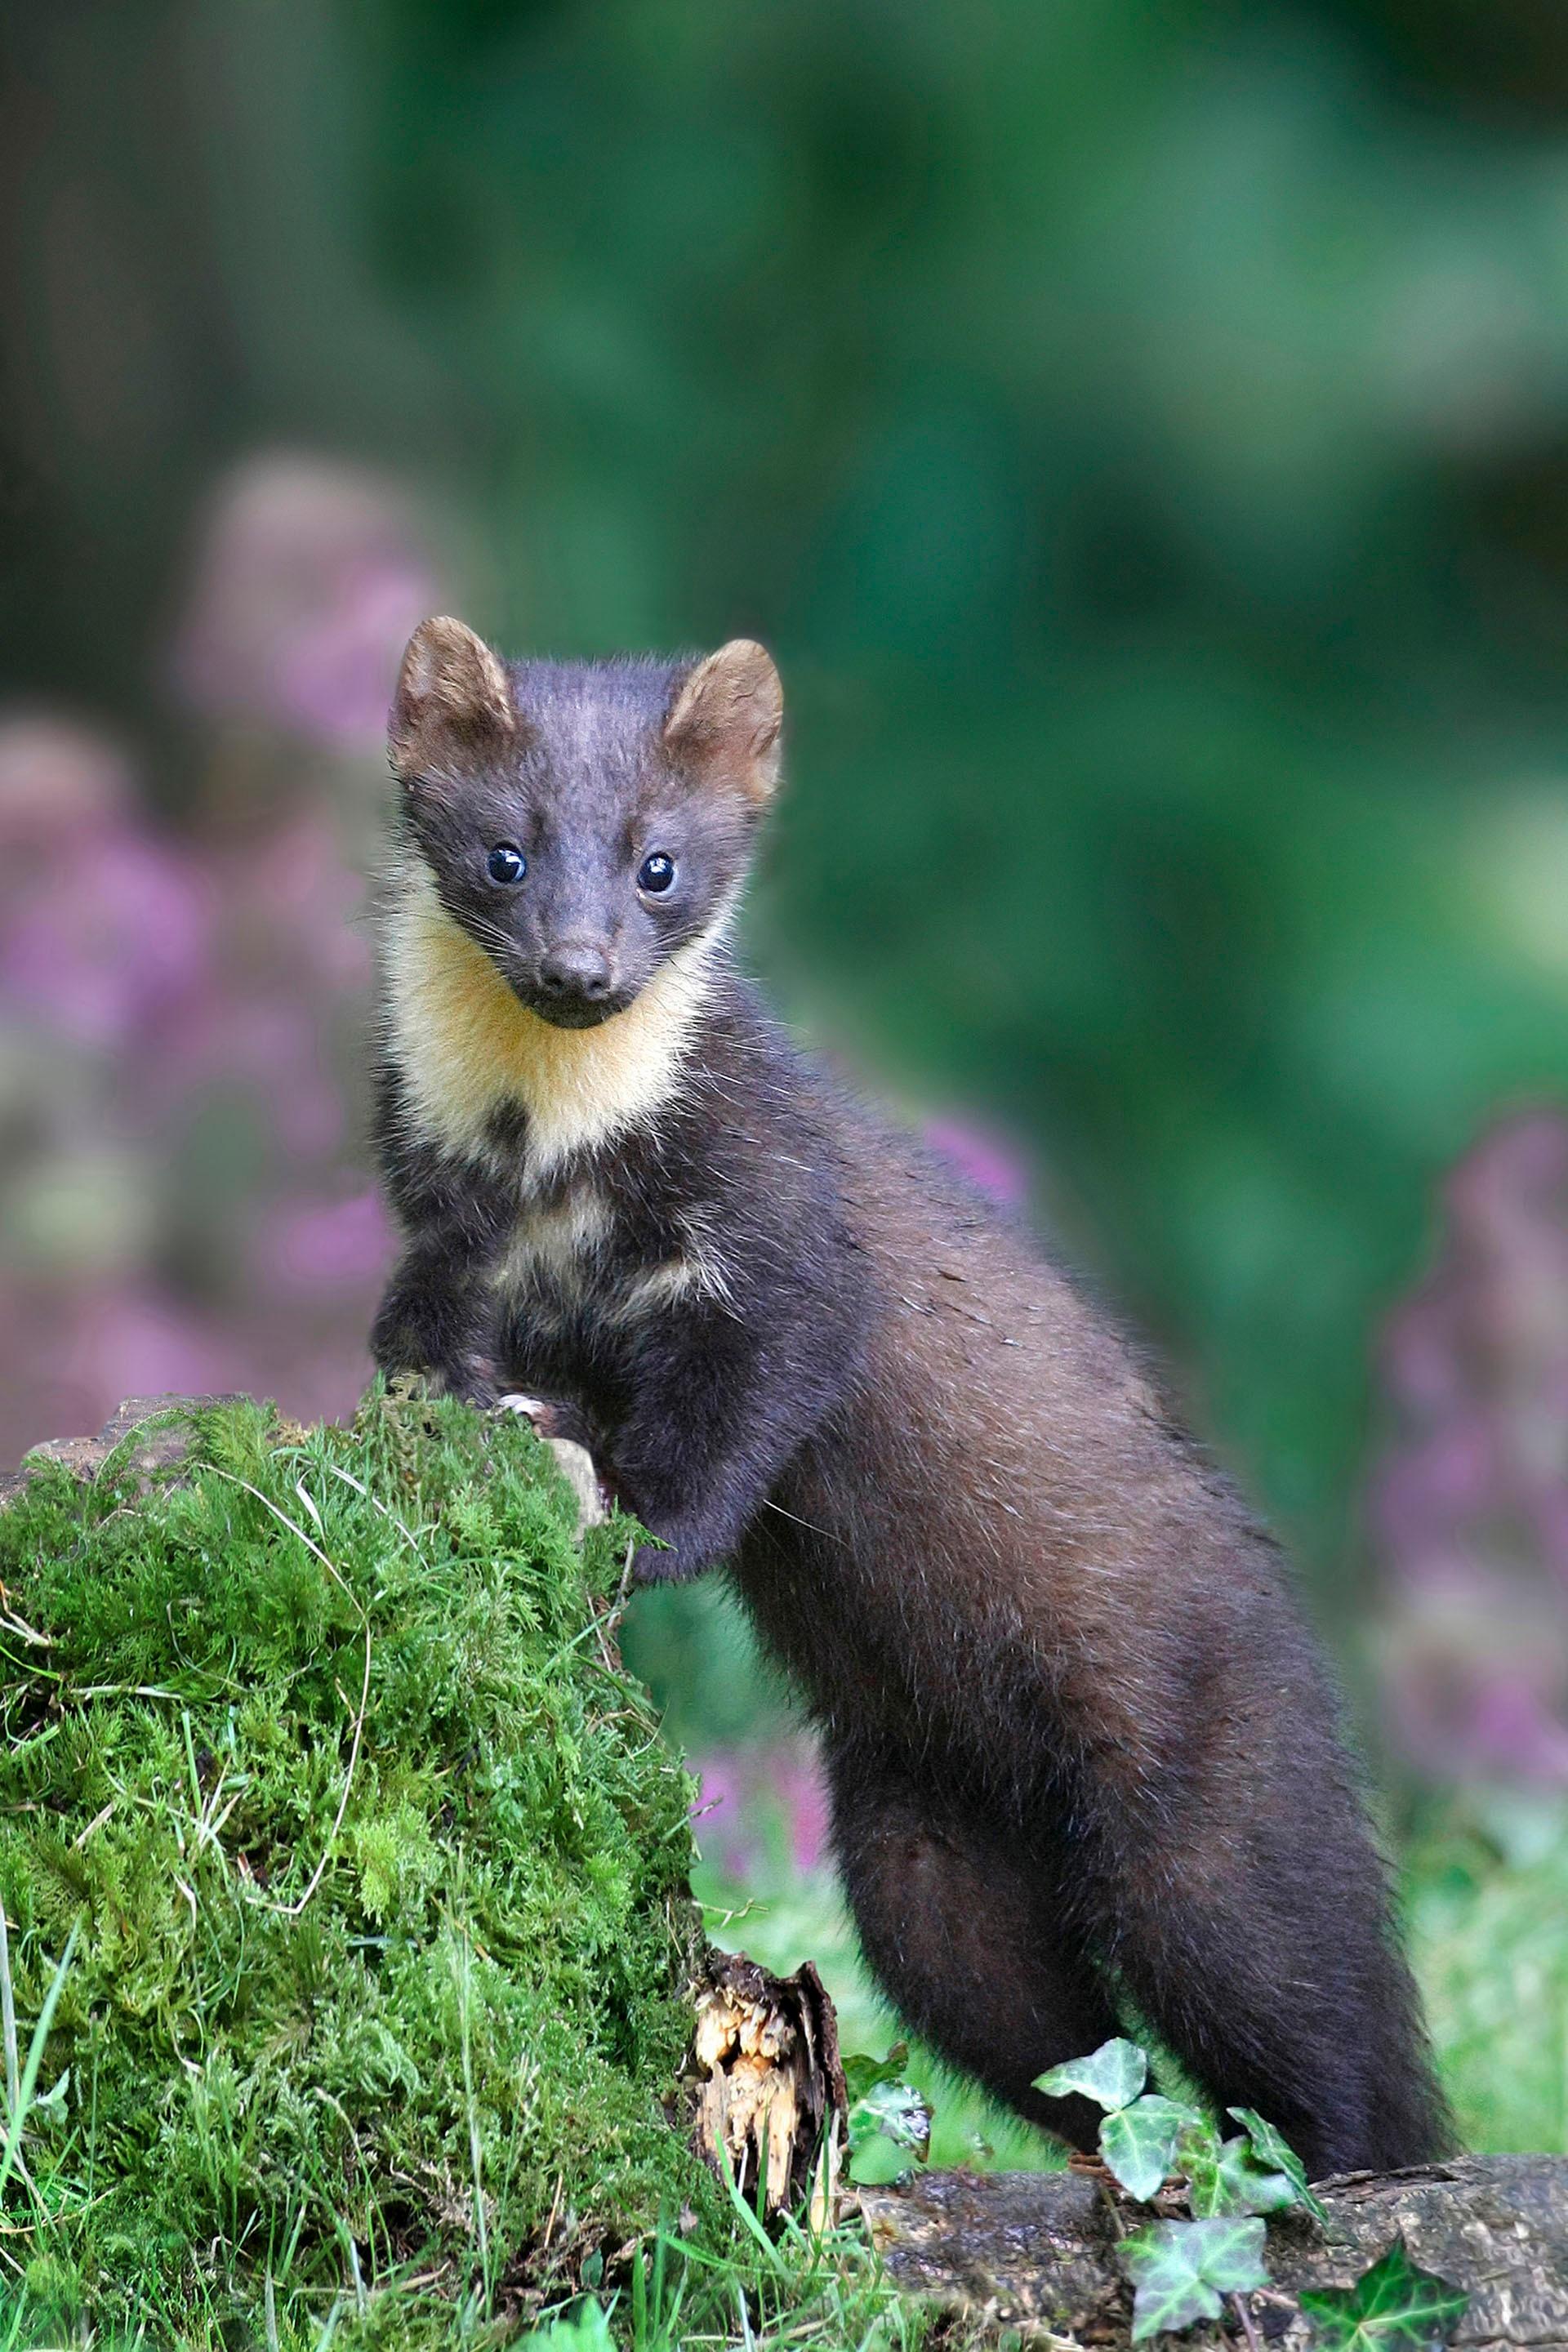 Once rare in Ireland, the Pine Marten has made a resurgence in recent years.